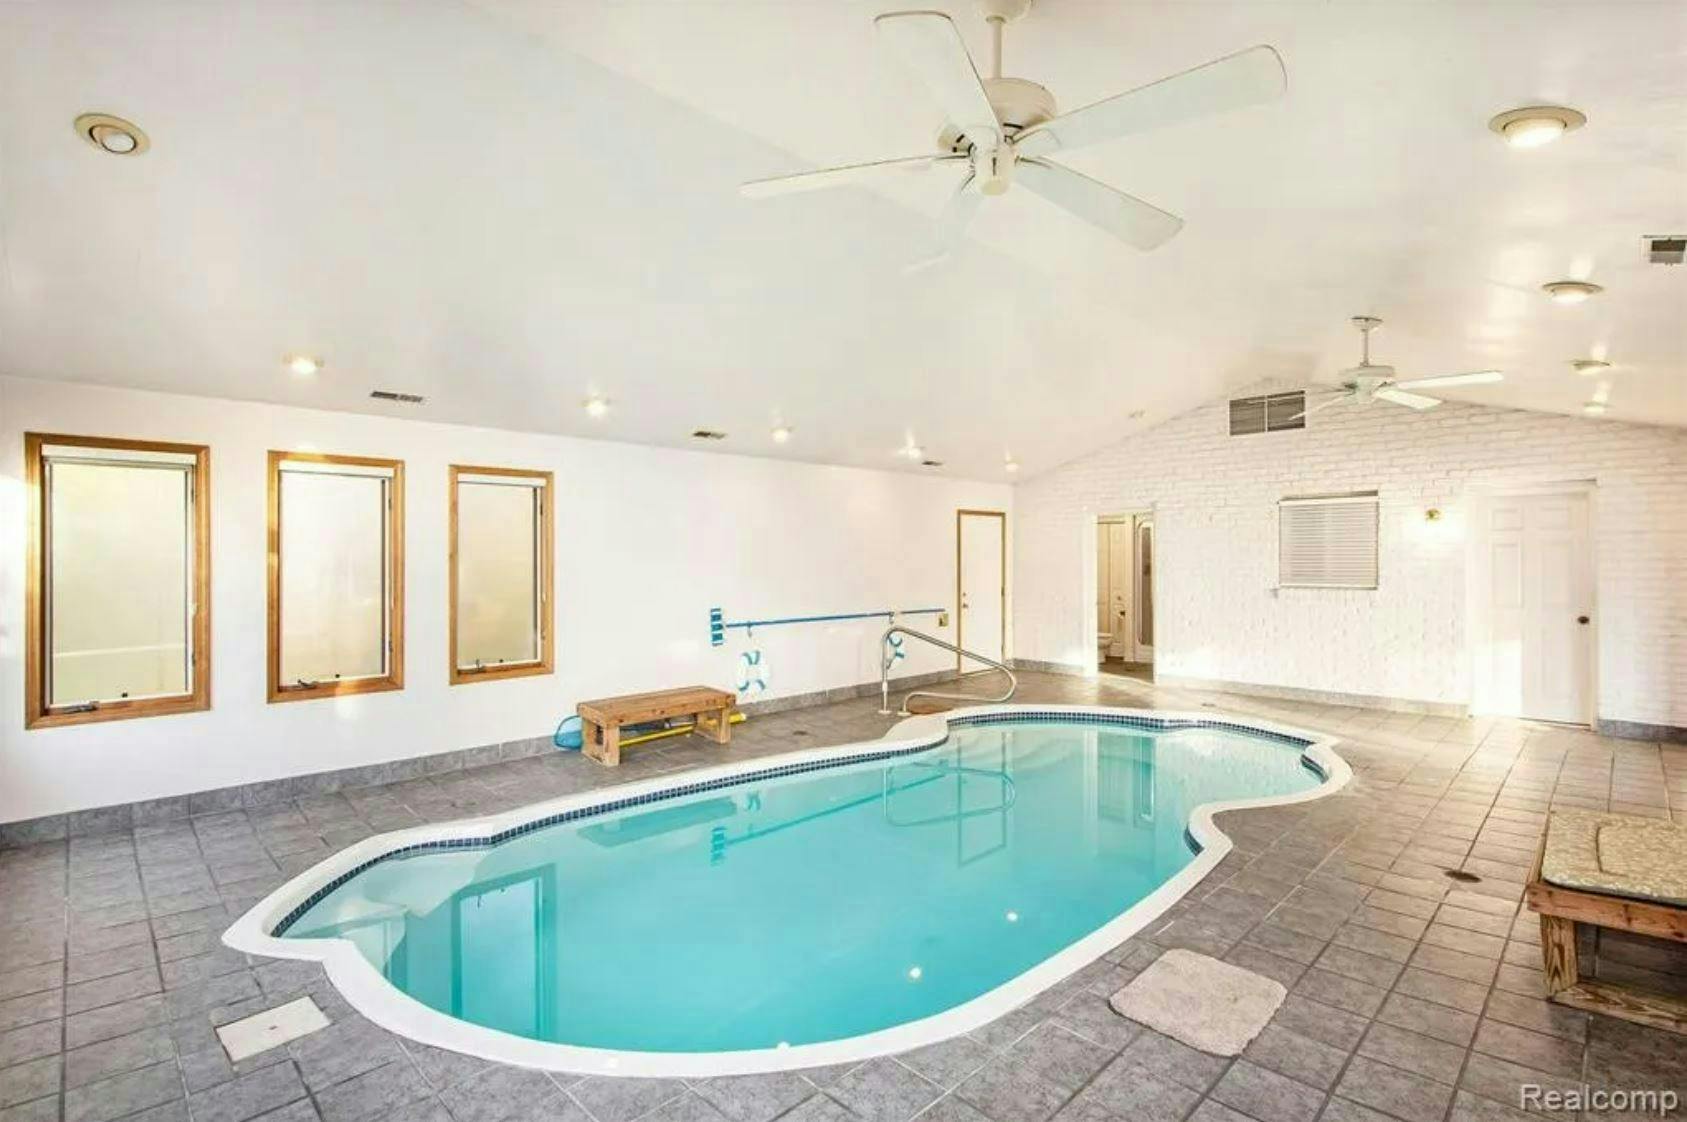 Heated Indoor Pool With Private Bathroom And Shower